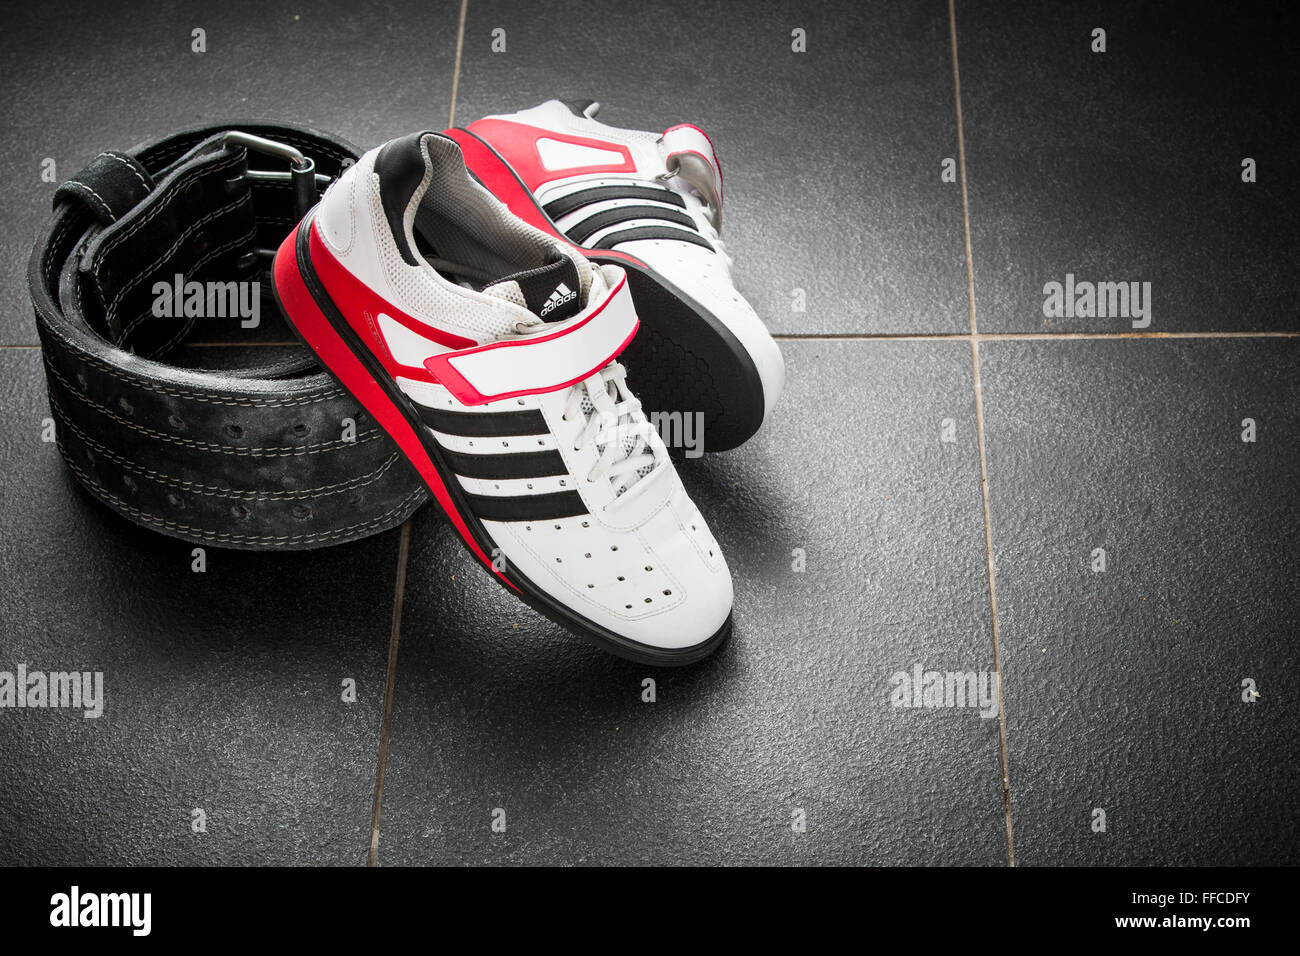 Adidas Olympic weightlifting shoes on a grey tiled floor with a weightlifting belt. Stock Photo